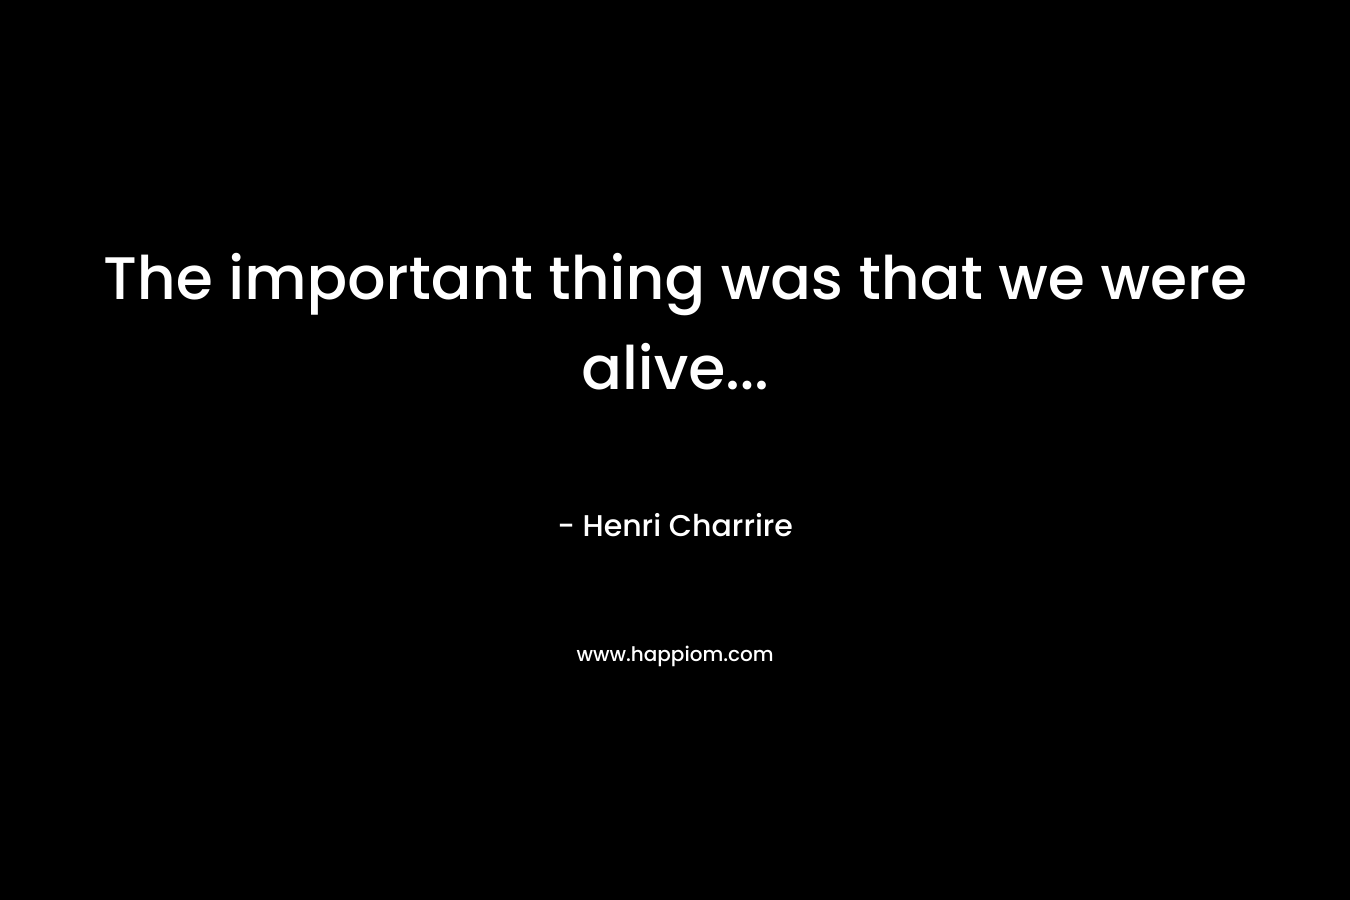 The important thing was that we were alive...